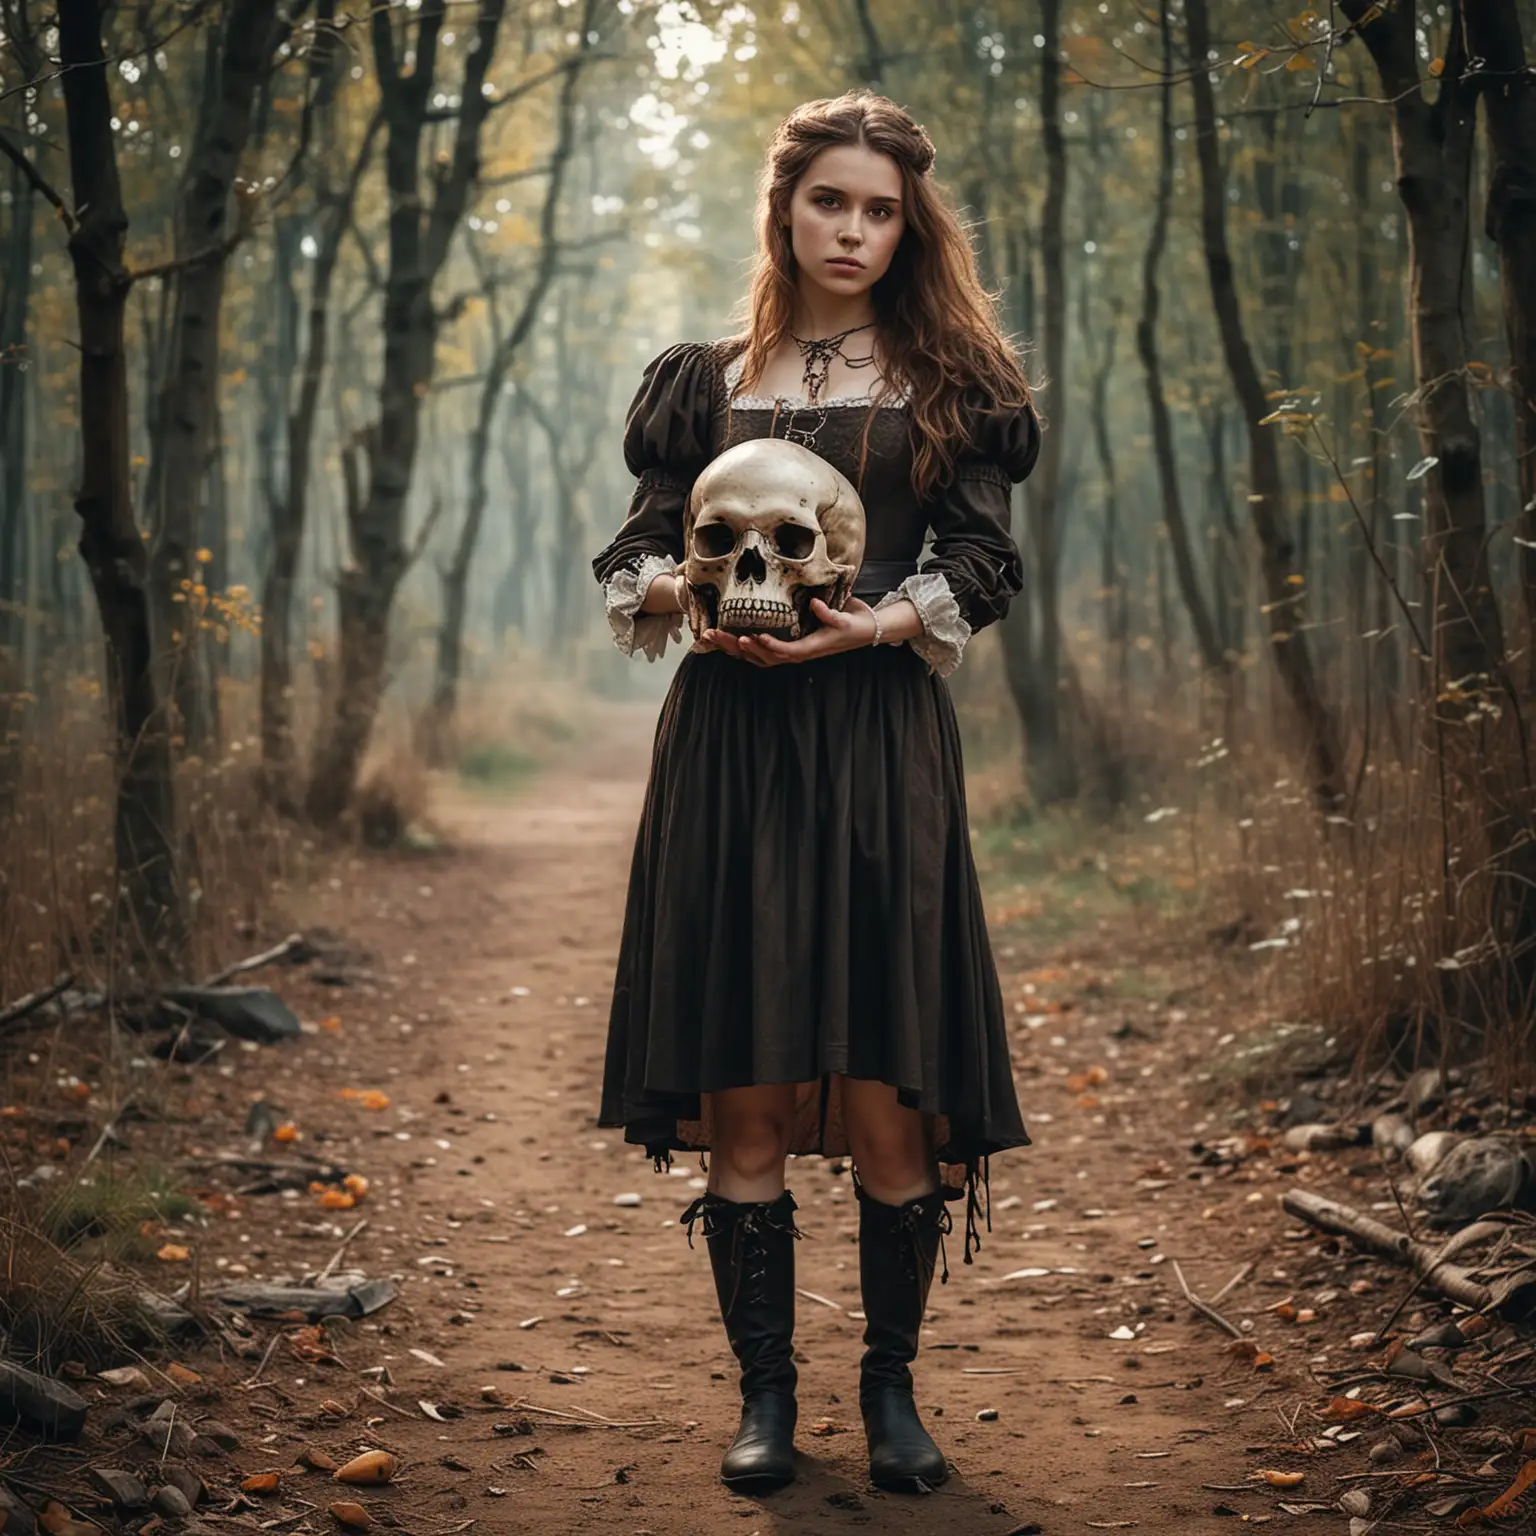 A young woman with brown hair in a medieval dress and long boots holds a skull in her hand